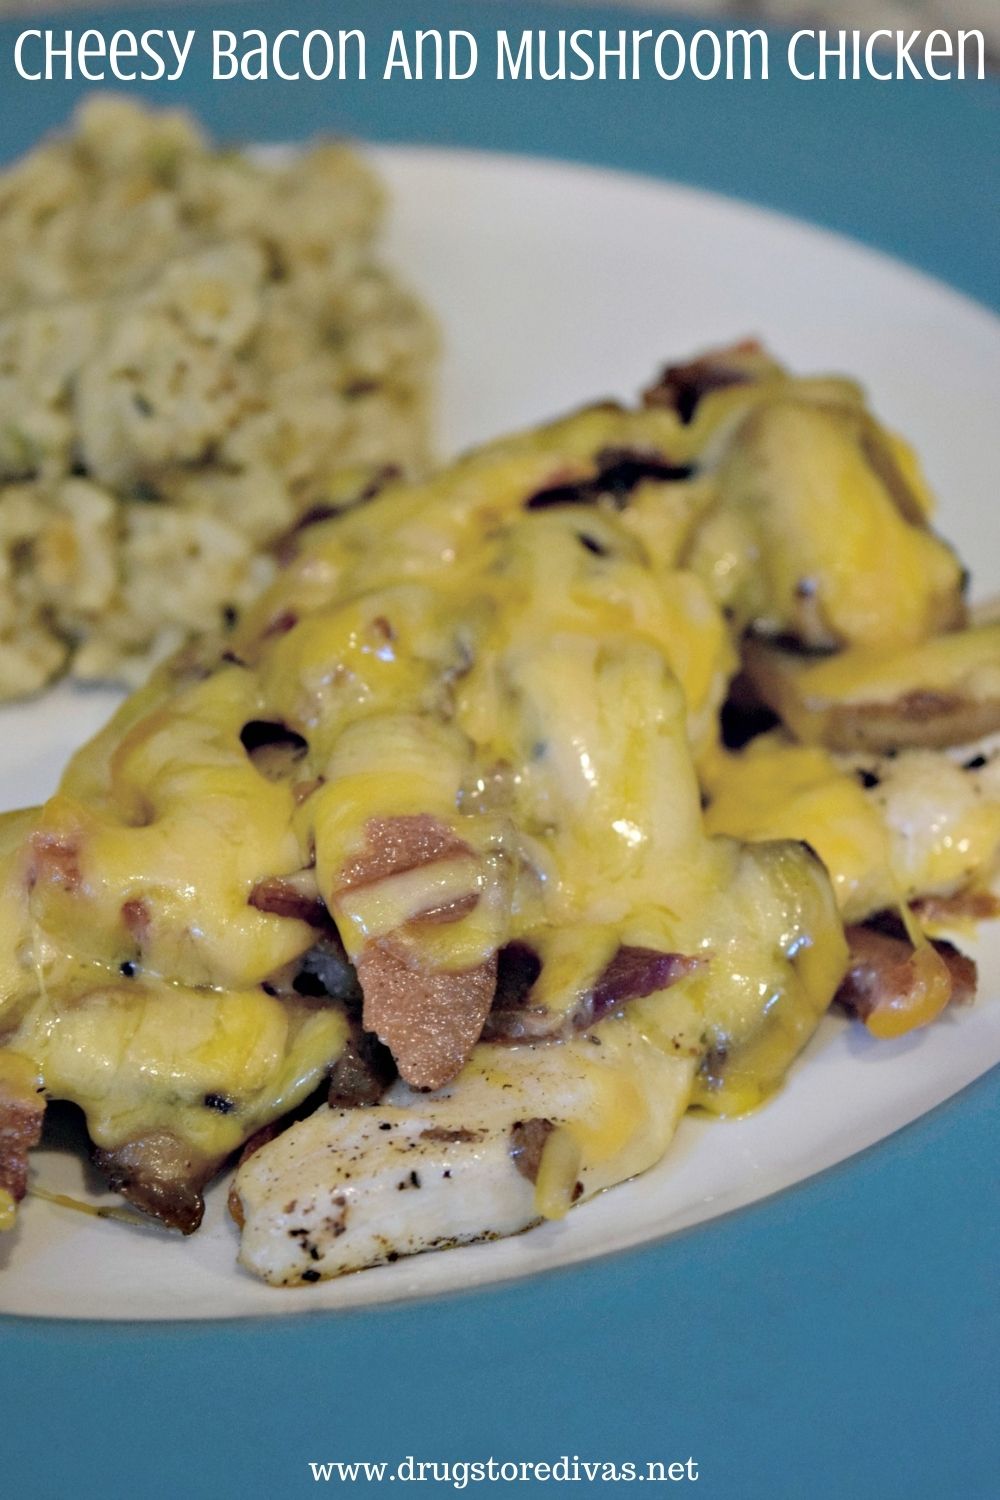 Cheesy Bacon And Mushroom Chicken on a plate with rice and the words "Cheesy Bacon And Mushroom Chicken" digitally written on top.